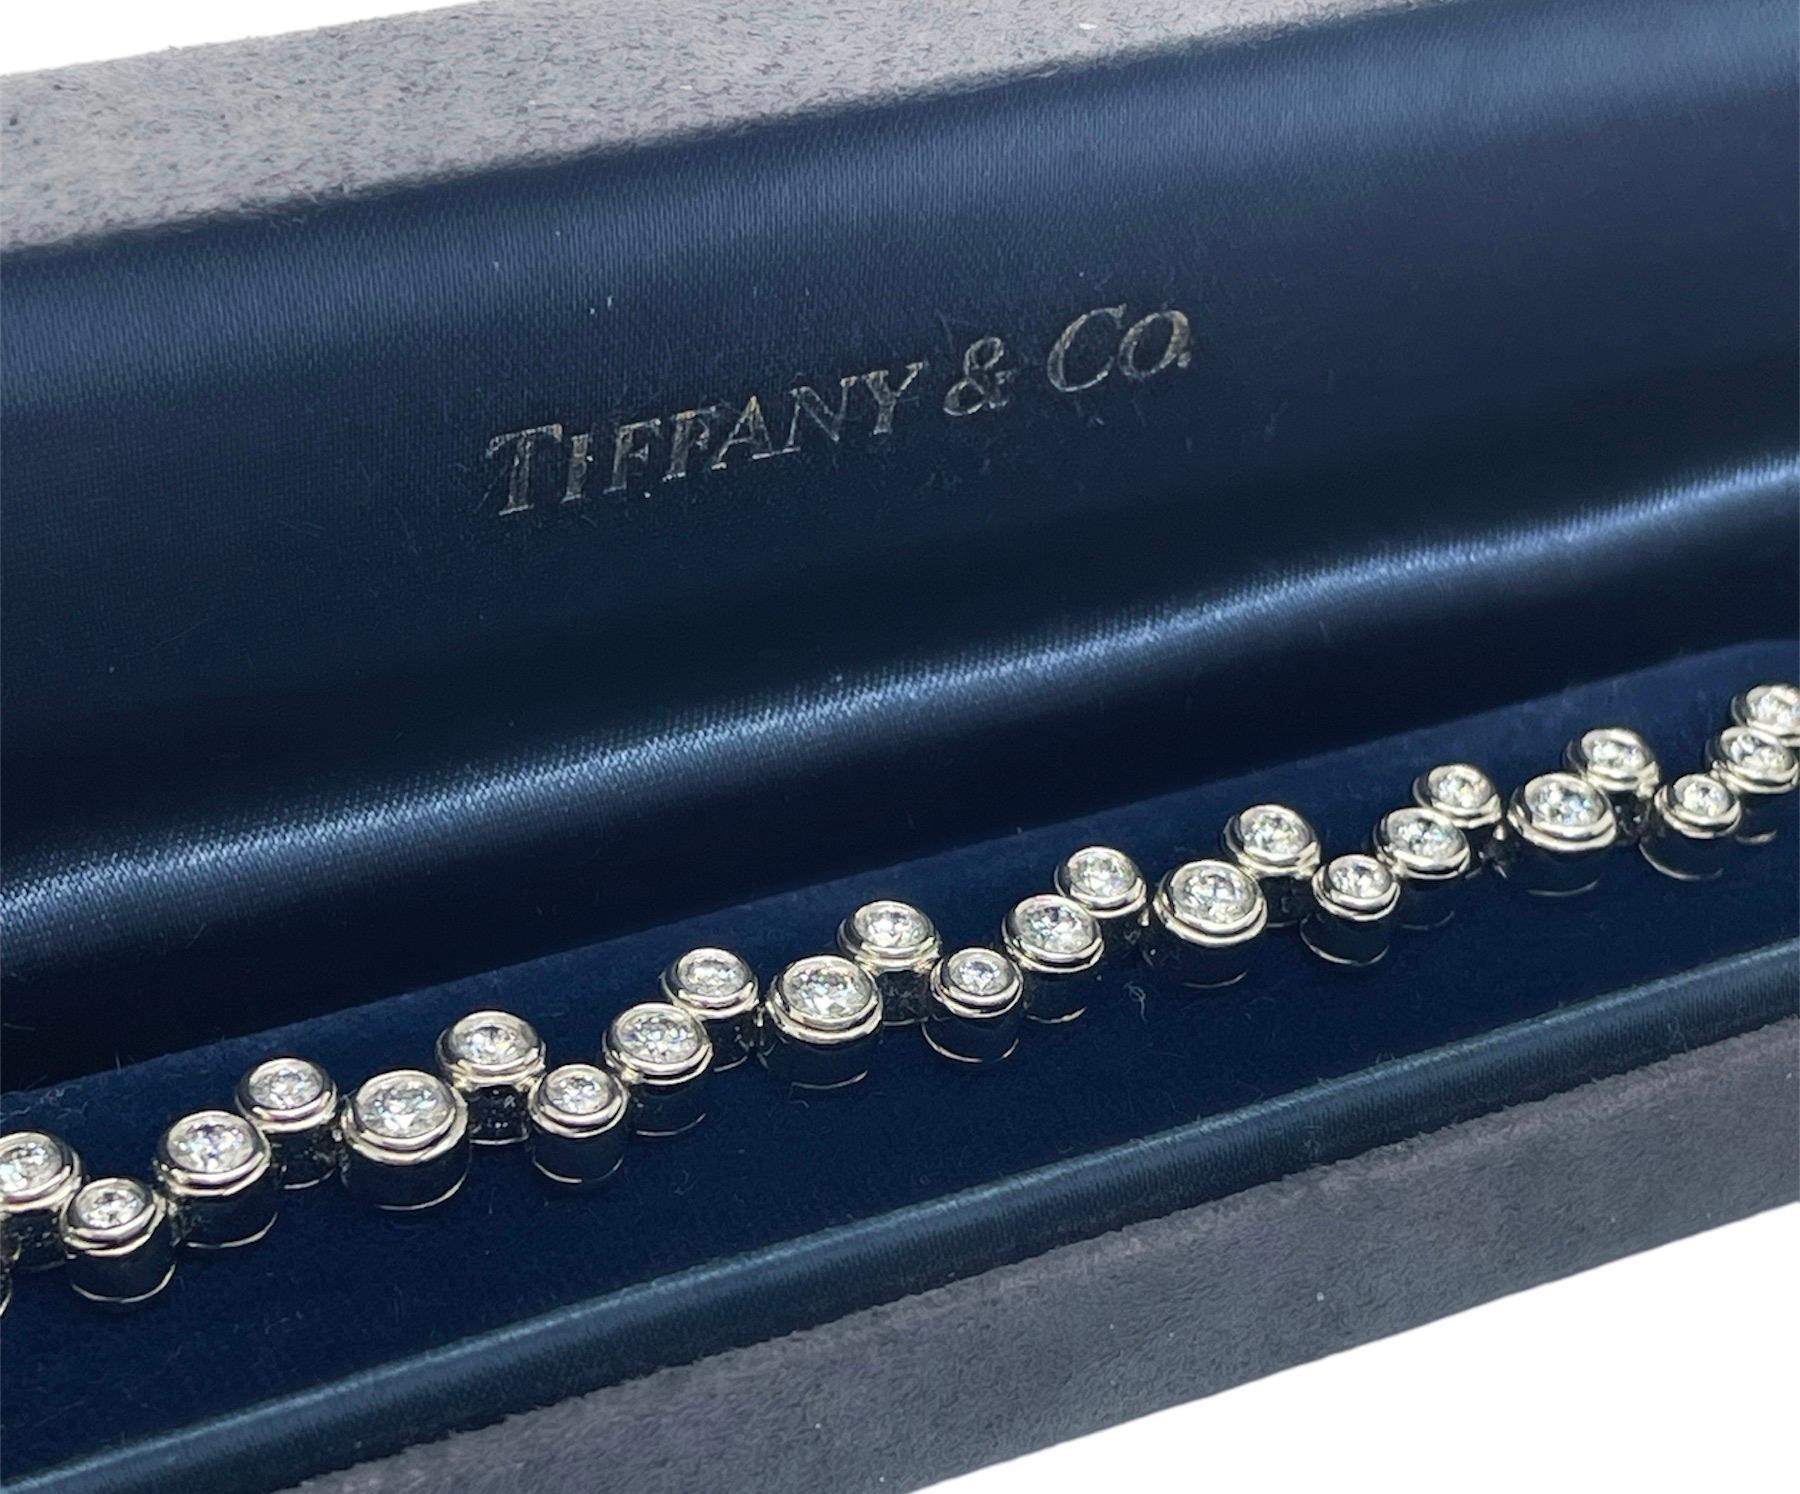 This playfully designed bracelet features 3.65 carats of top quality round brilliant cut diamonds in a bubble like design. 

Stamp: 2002 TIFFANY&CO. PT950
Measurements: 7 inches long
Weight: 39.20 grams
Accompanied by a Tiffany & Co. Bracelet